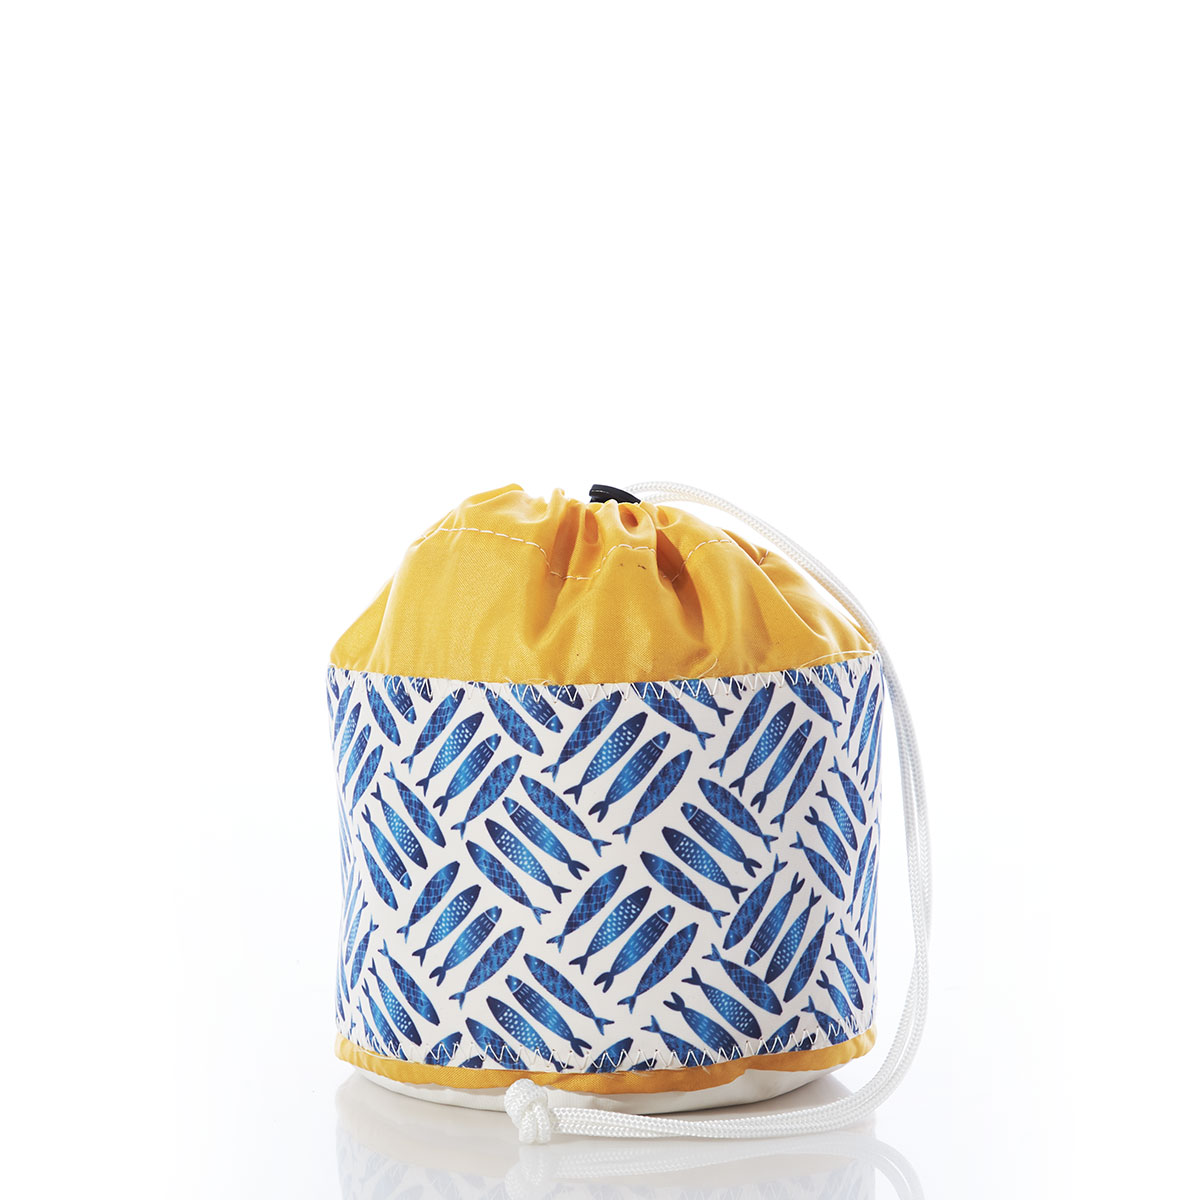 criss cross print of blue school of fish on recycled sail cloth ditty bag with drawstring